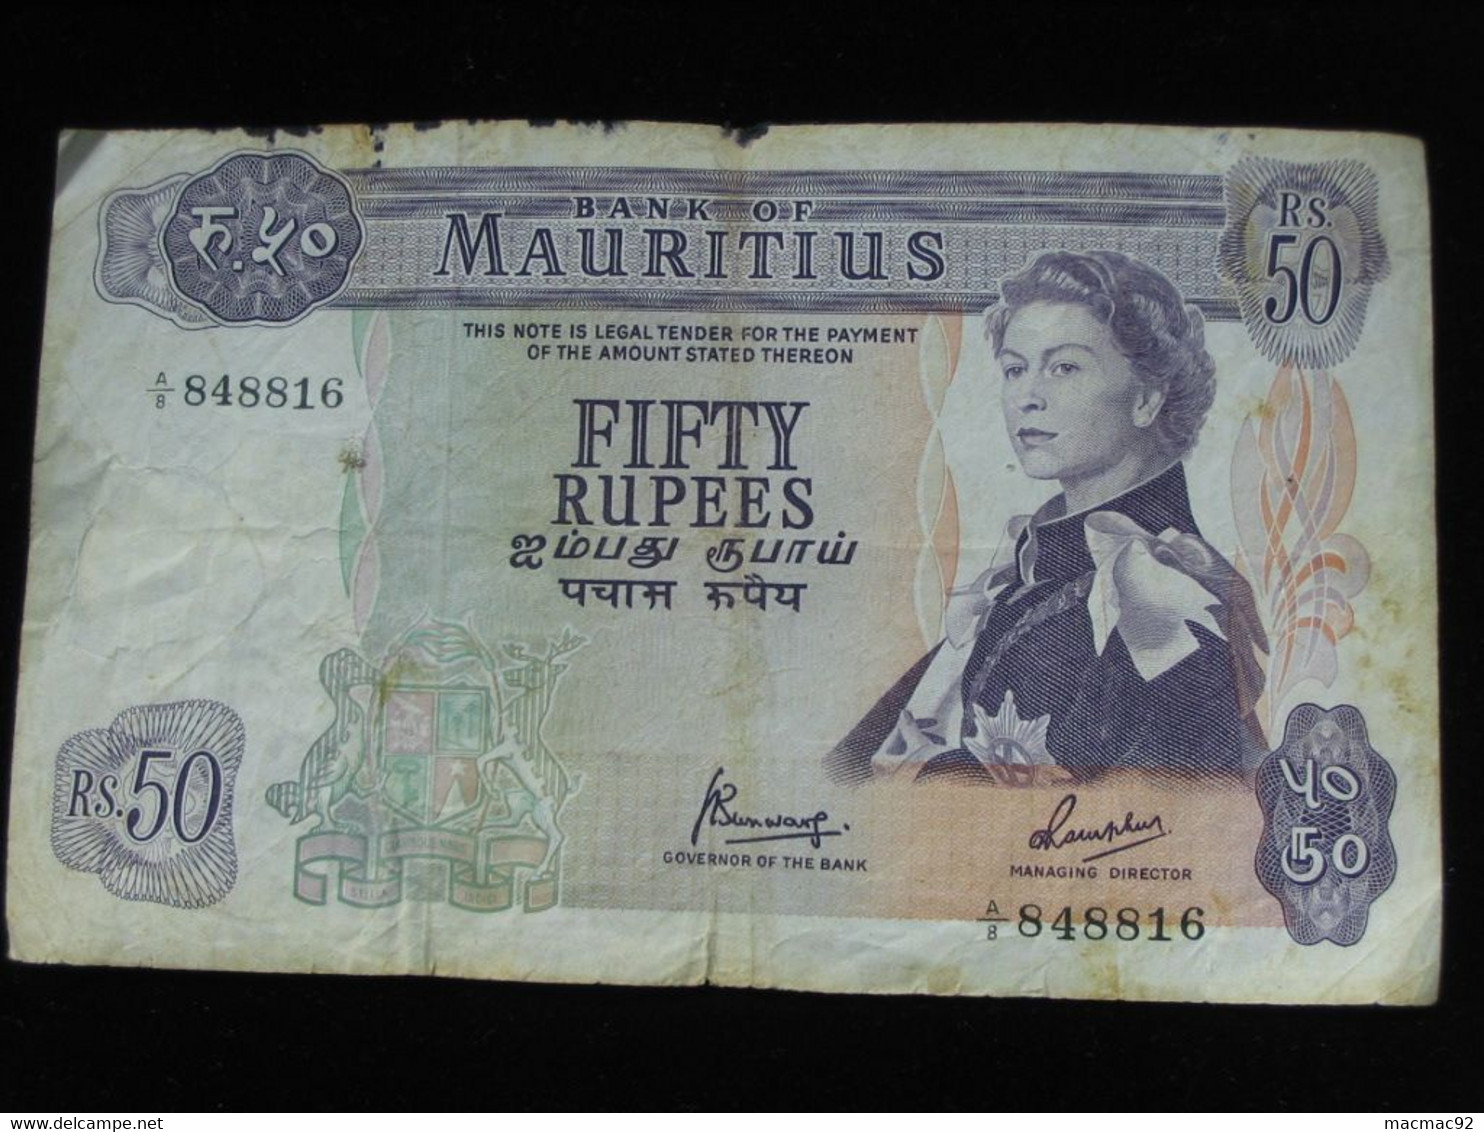 50 FIFTY Rupees 1967 - ILE MAURICE - Bank Of Mauritius  **** EN ACHAT IMMEDIAT ***** - Maurice